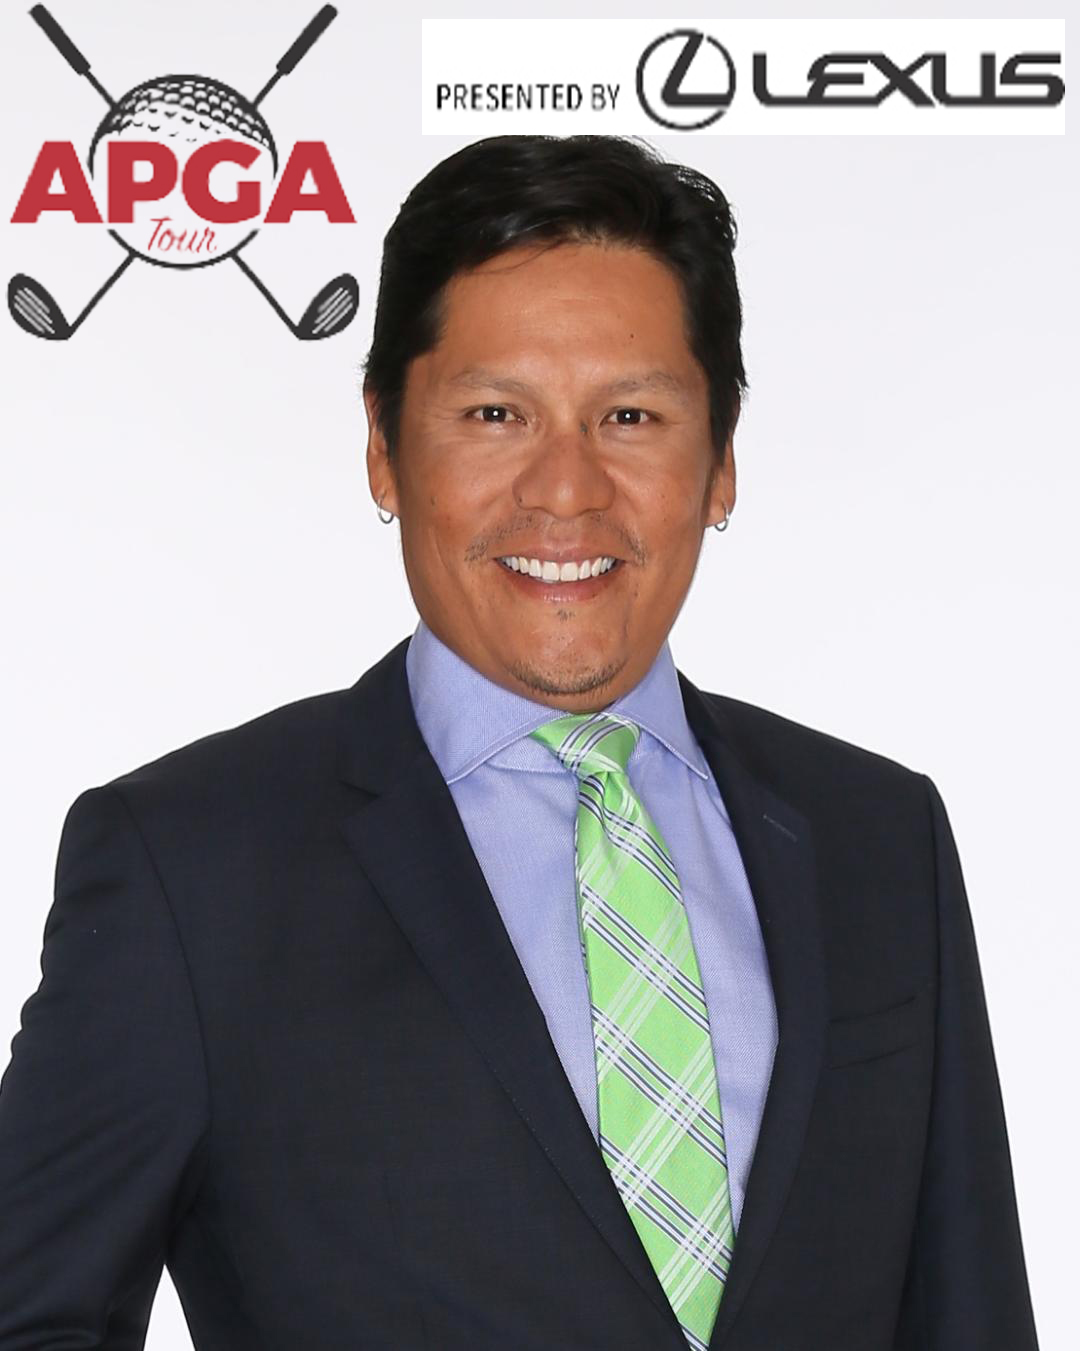 Notah Begay, Pga Tour Winner And Golf Channel/NBC Sports Analyst/Reporter, Teeing It Up Next Week With The APGA Tour